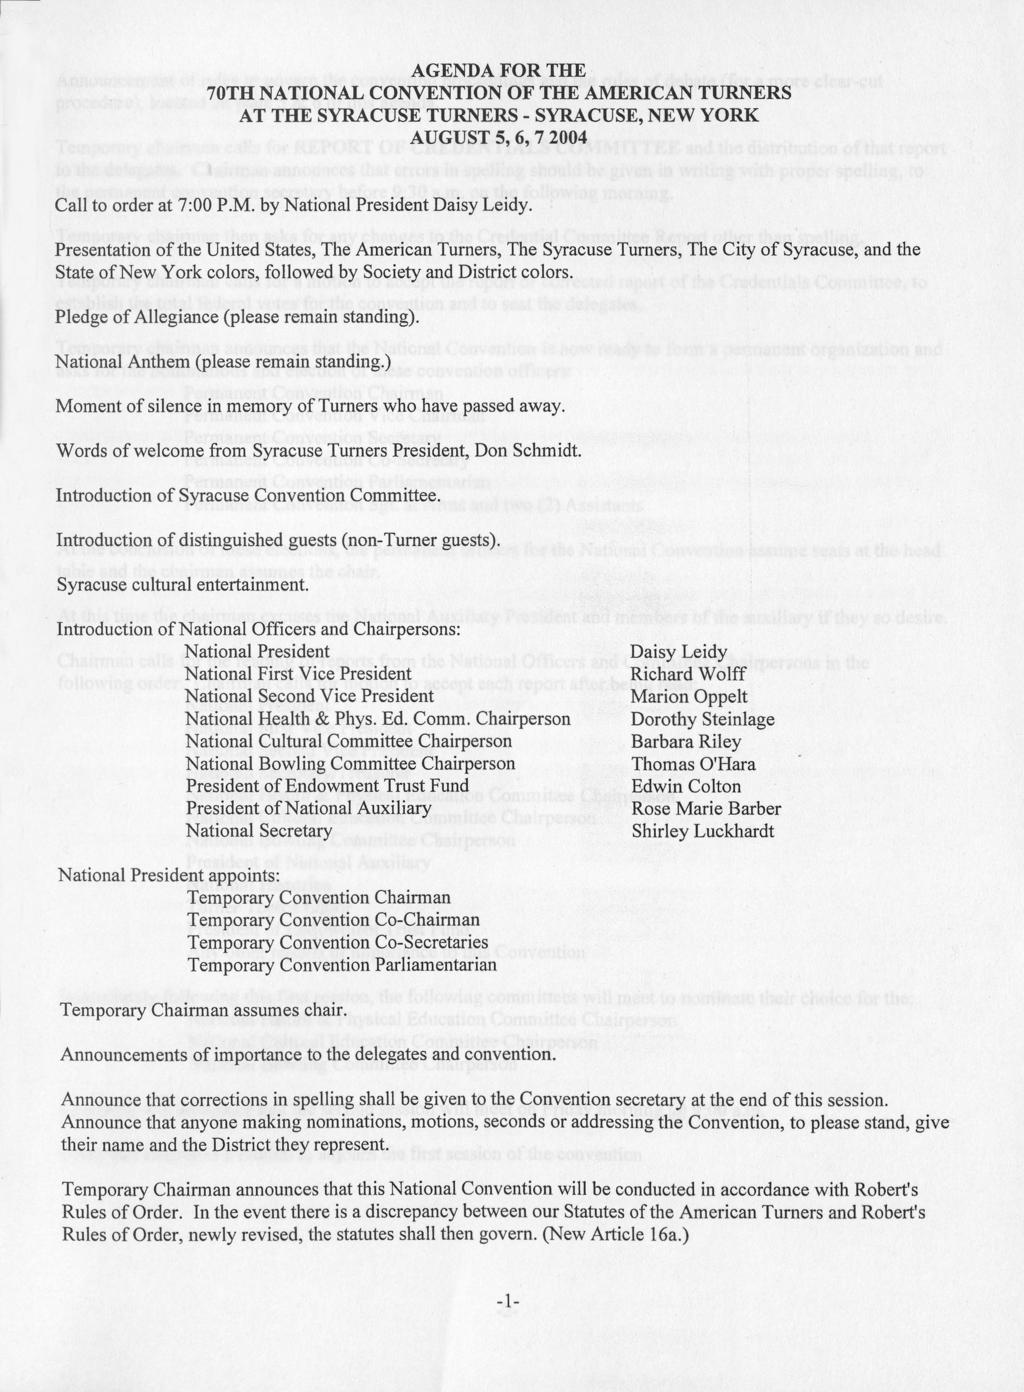 AGENDA FOR THE 70TH NATIONAL CONVENTION OF THE AMERICAN TURNERS AT THE SYRACUSE TURNERS - SYRACUSE, NEW YORK AUGUST 5, 6, 7 2004 Call to order at 7:00 P.M. by National President Daisy Leidy.